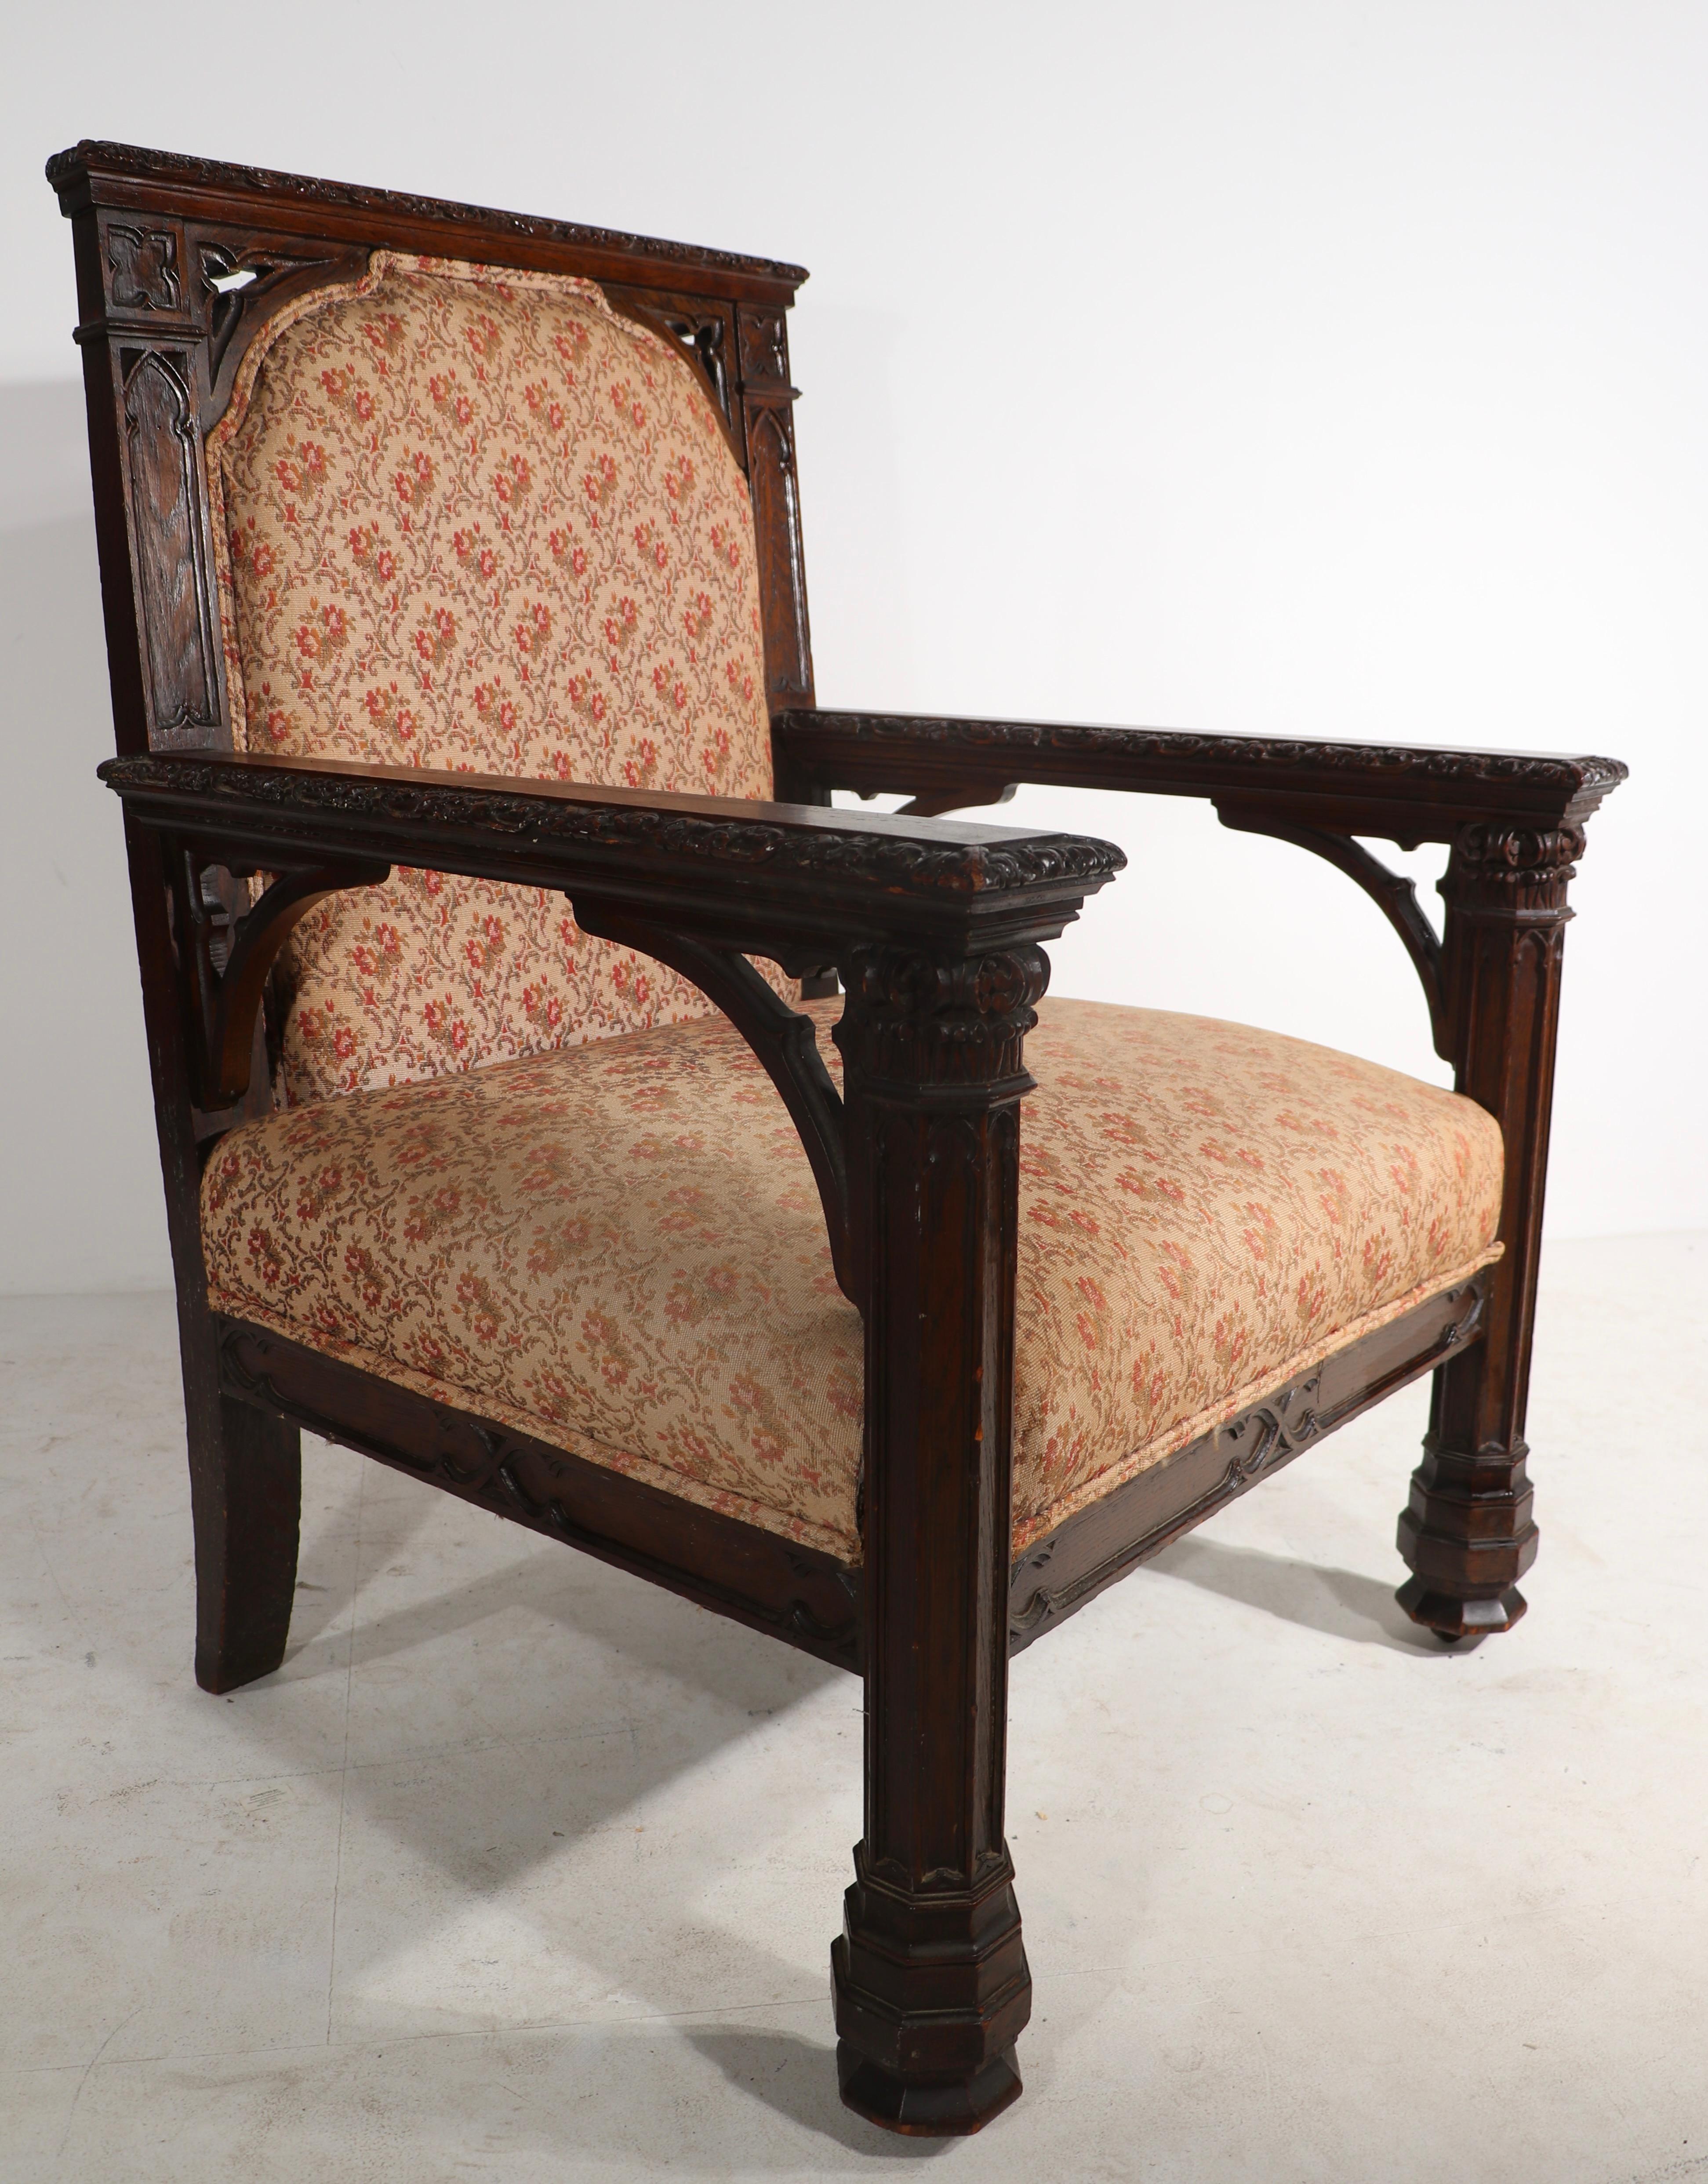 Fabulous over-scale Gothic Revial throne style arm chair-in carved oak, with (re upholstered) seat and backrest. 
This example is in very good original condition showing only light cosmetic wear normal and consistent with age.
Carved wood, well